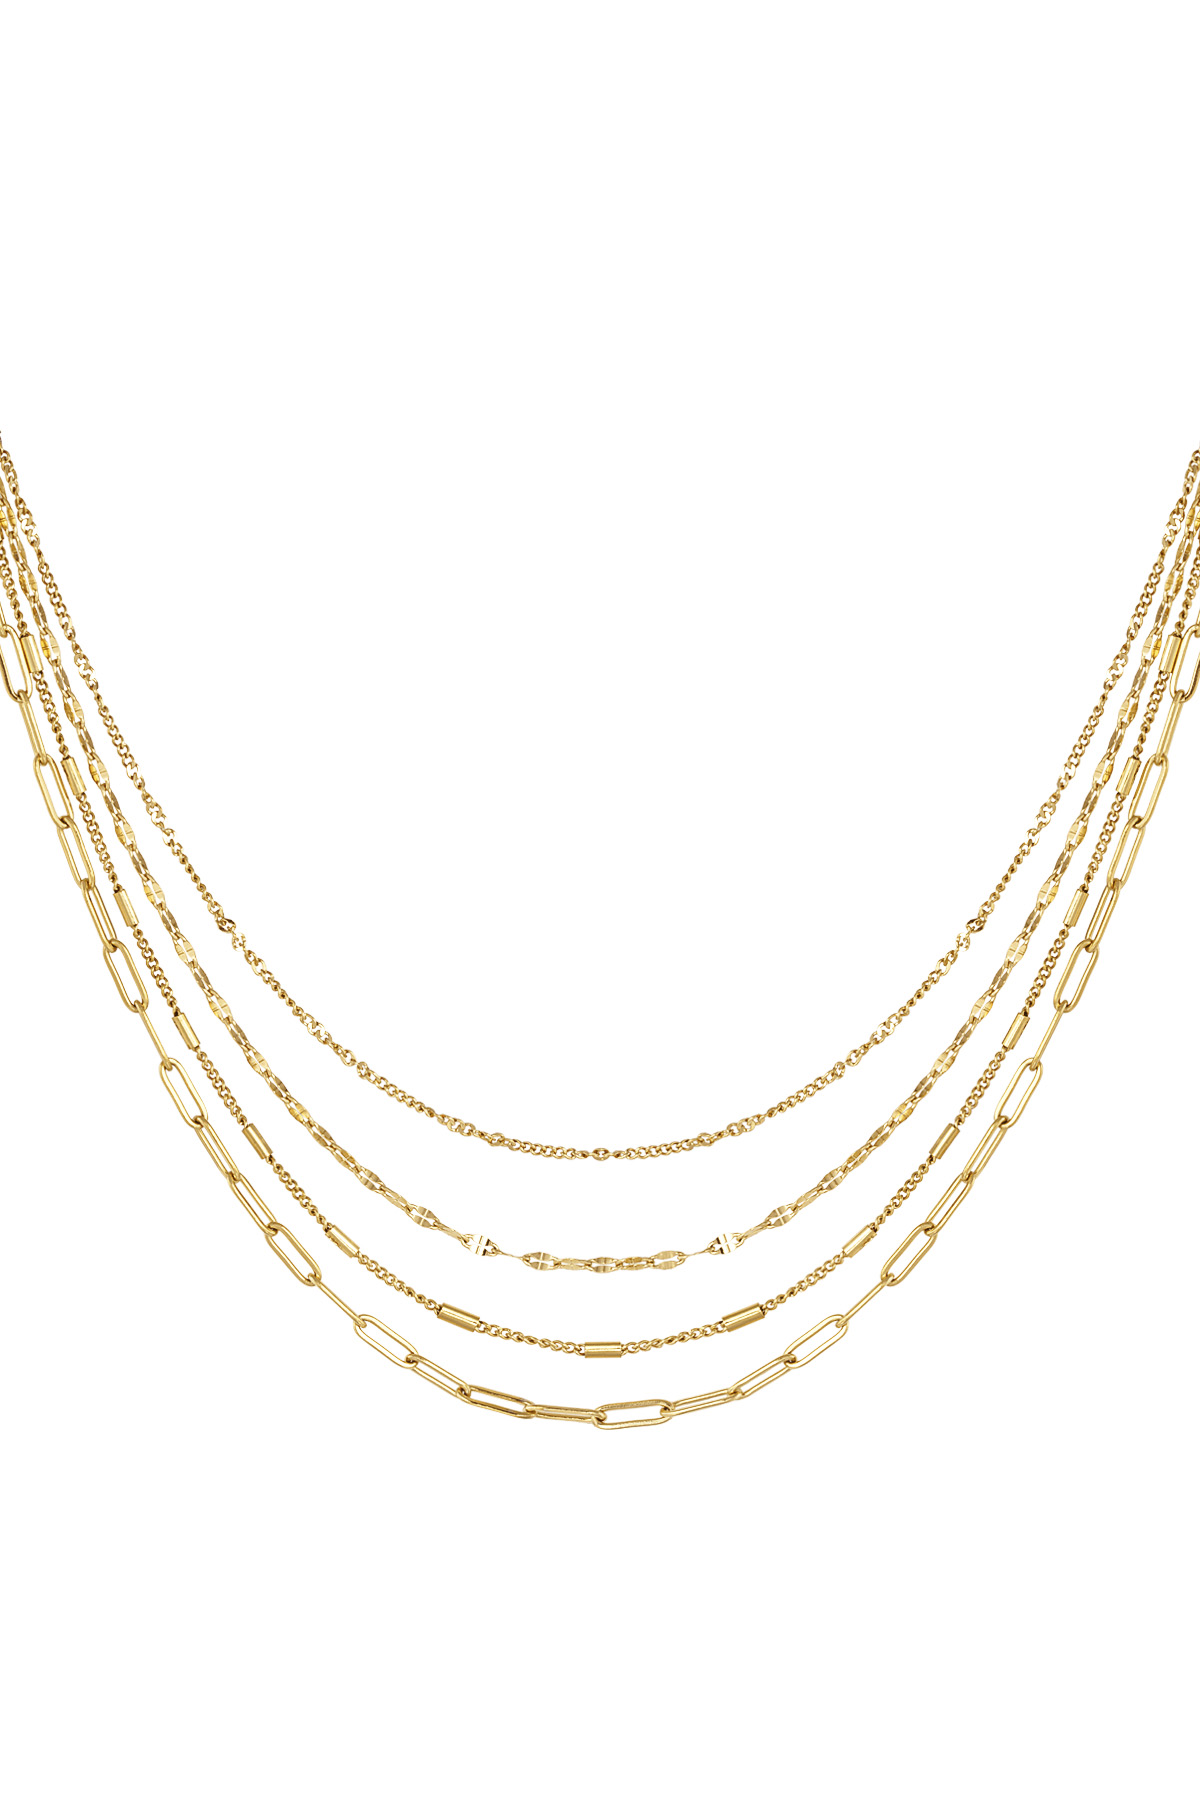 Link chain 4 layers - gold 